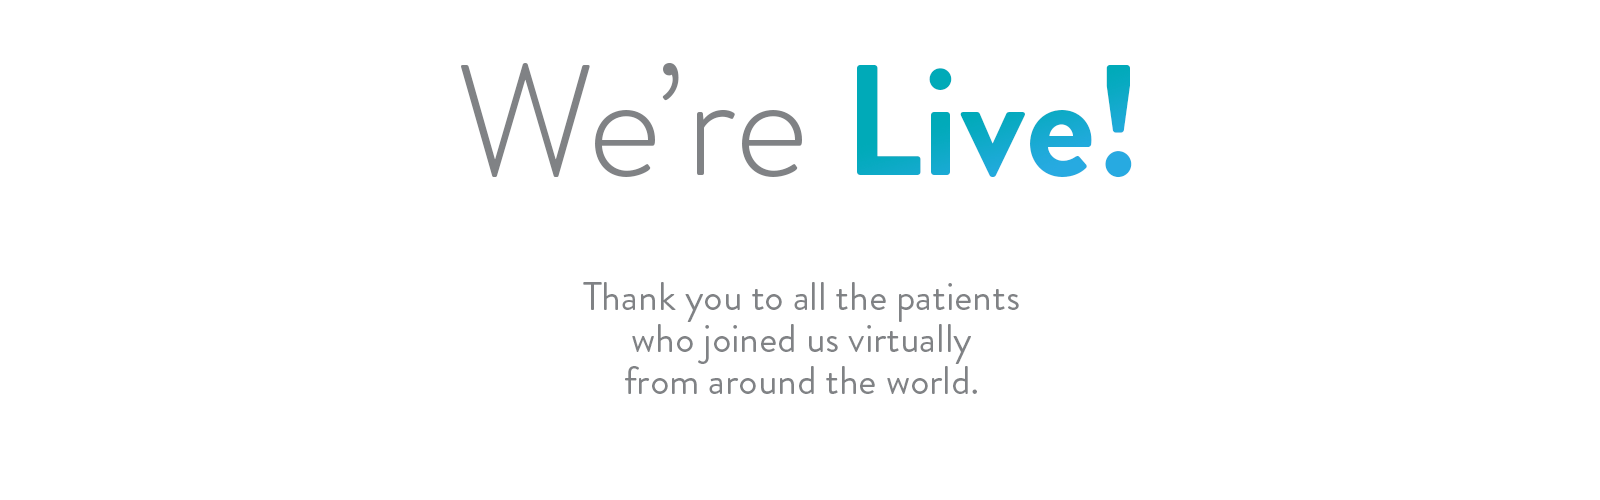 We're Live! Thank you to all the patients who joined us virtually from around the world.